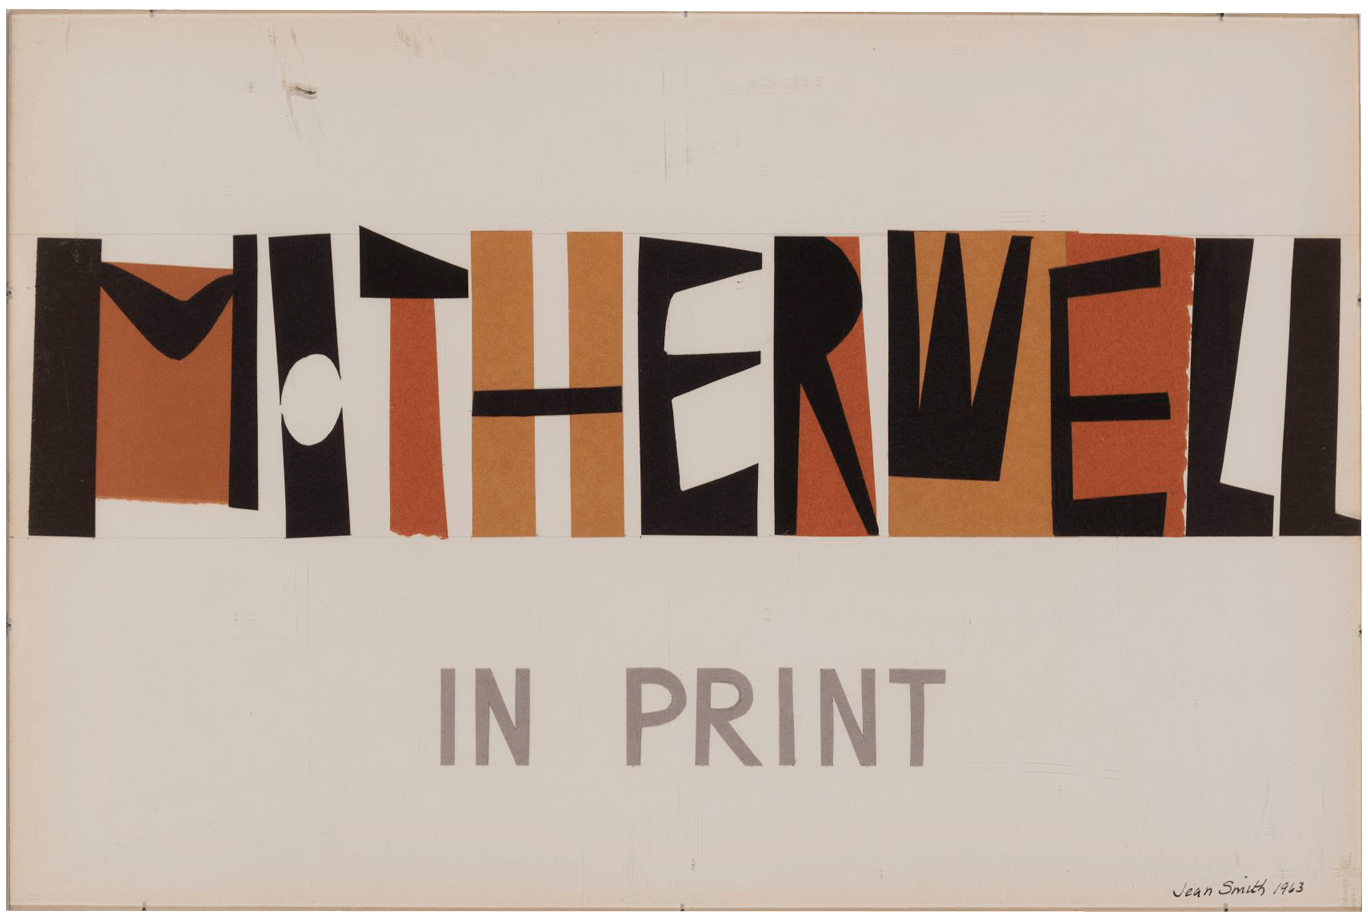 Motherwell in Print, 1963. Features a handmade cutout font in shades of orange and black on a white background.